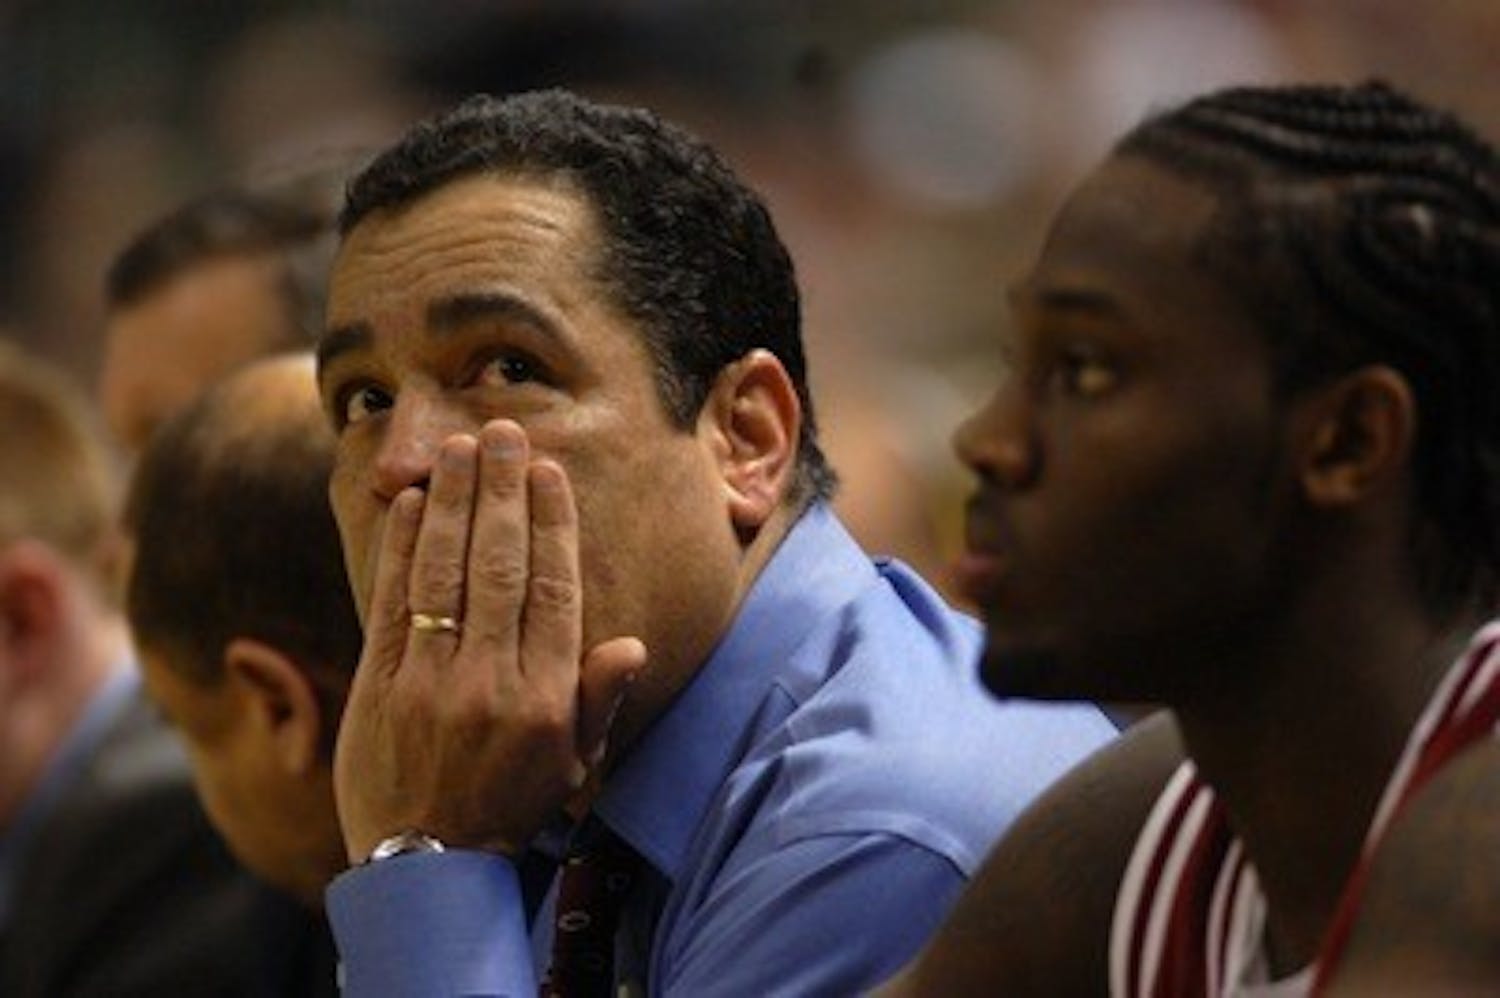 Geoffrey Miller • IDS
Kelvin Sampson glances at the scoreboard en route to the Hoosier's fifth straight road loss in East Lansing.  The loss marked the 13th consecutive loss in East Lansing.